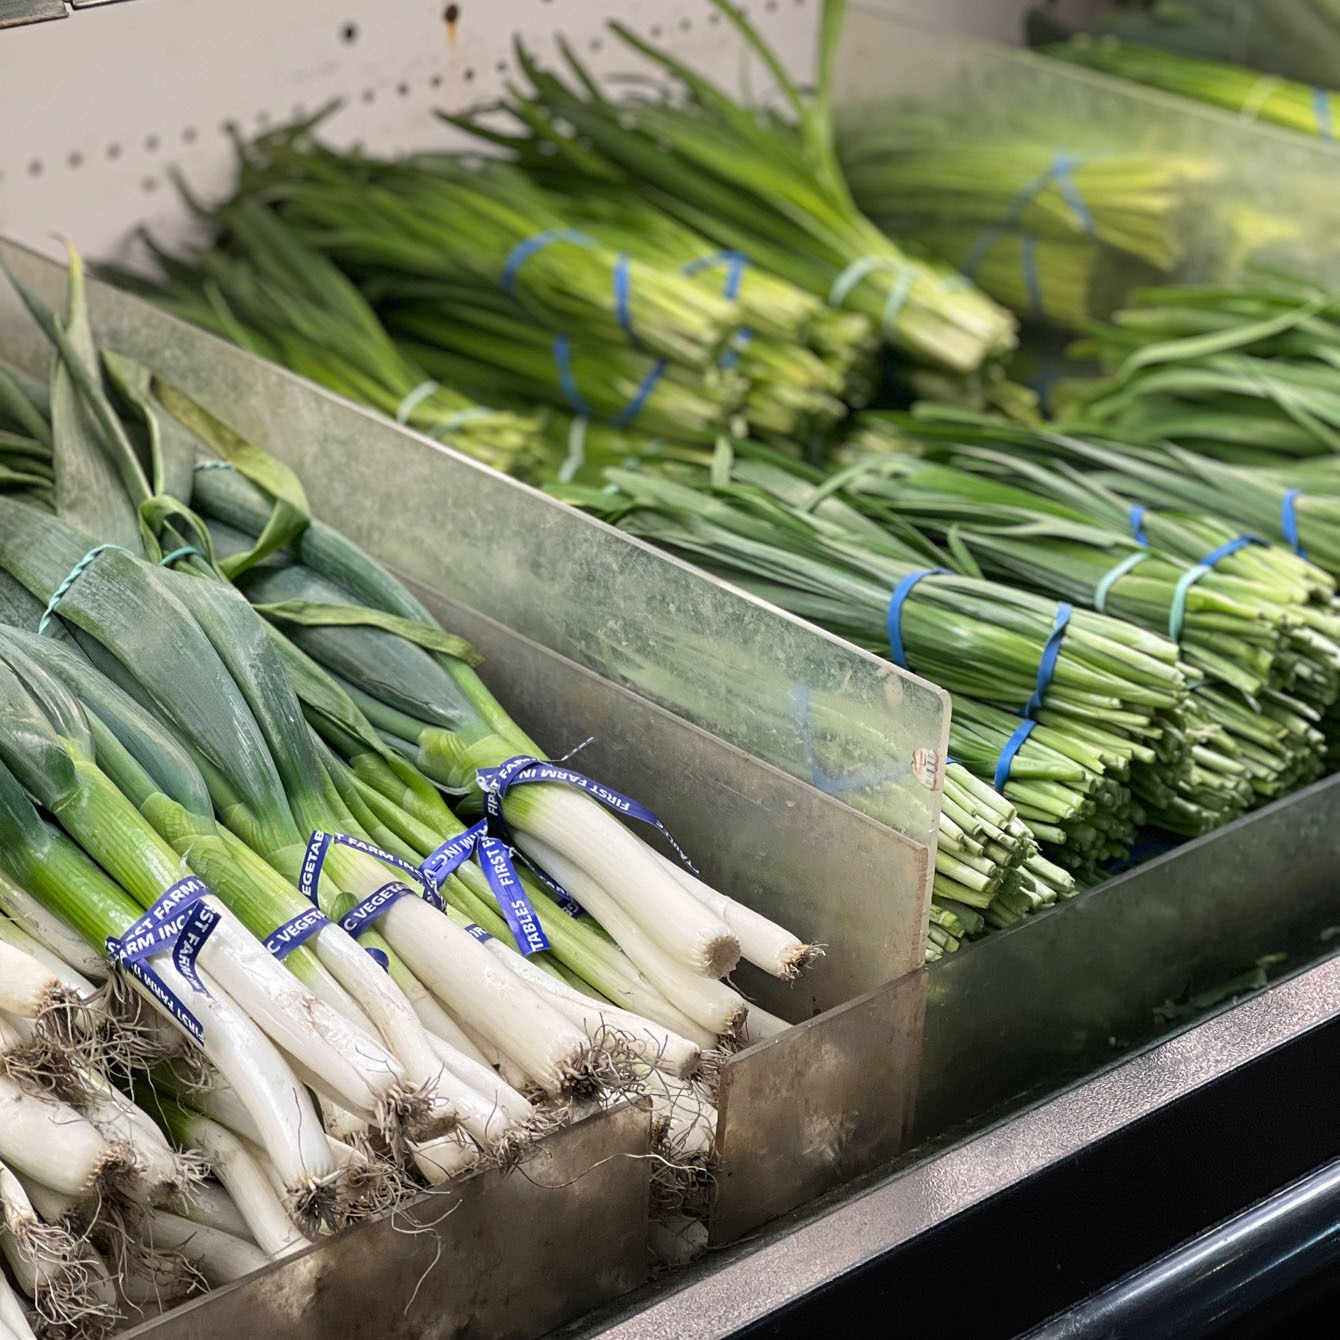 Bunches of Asian leeks and chives are displayed.